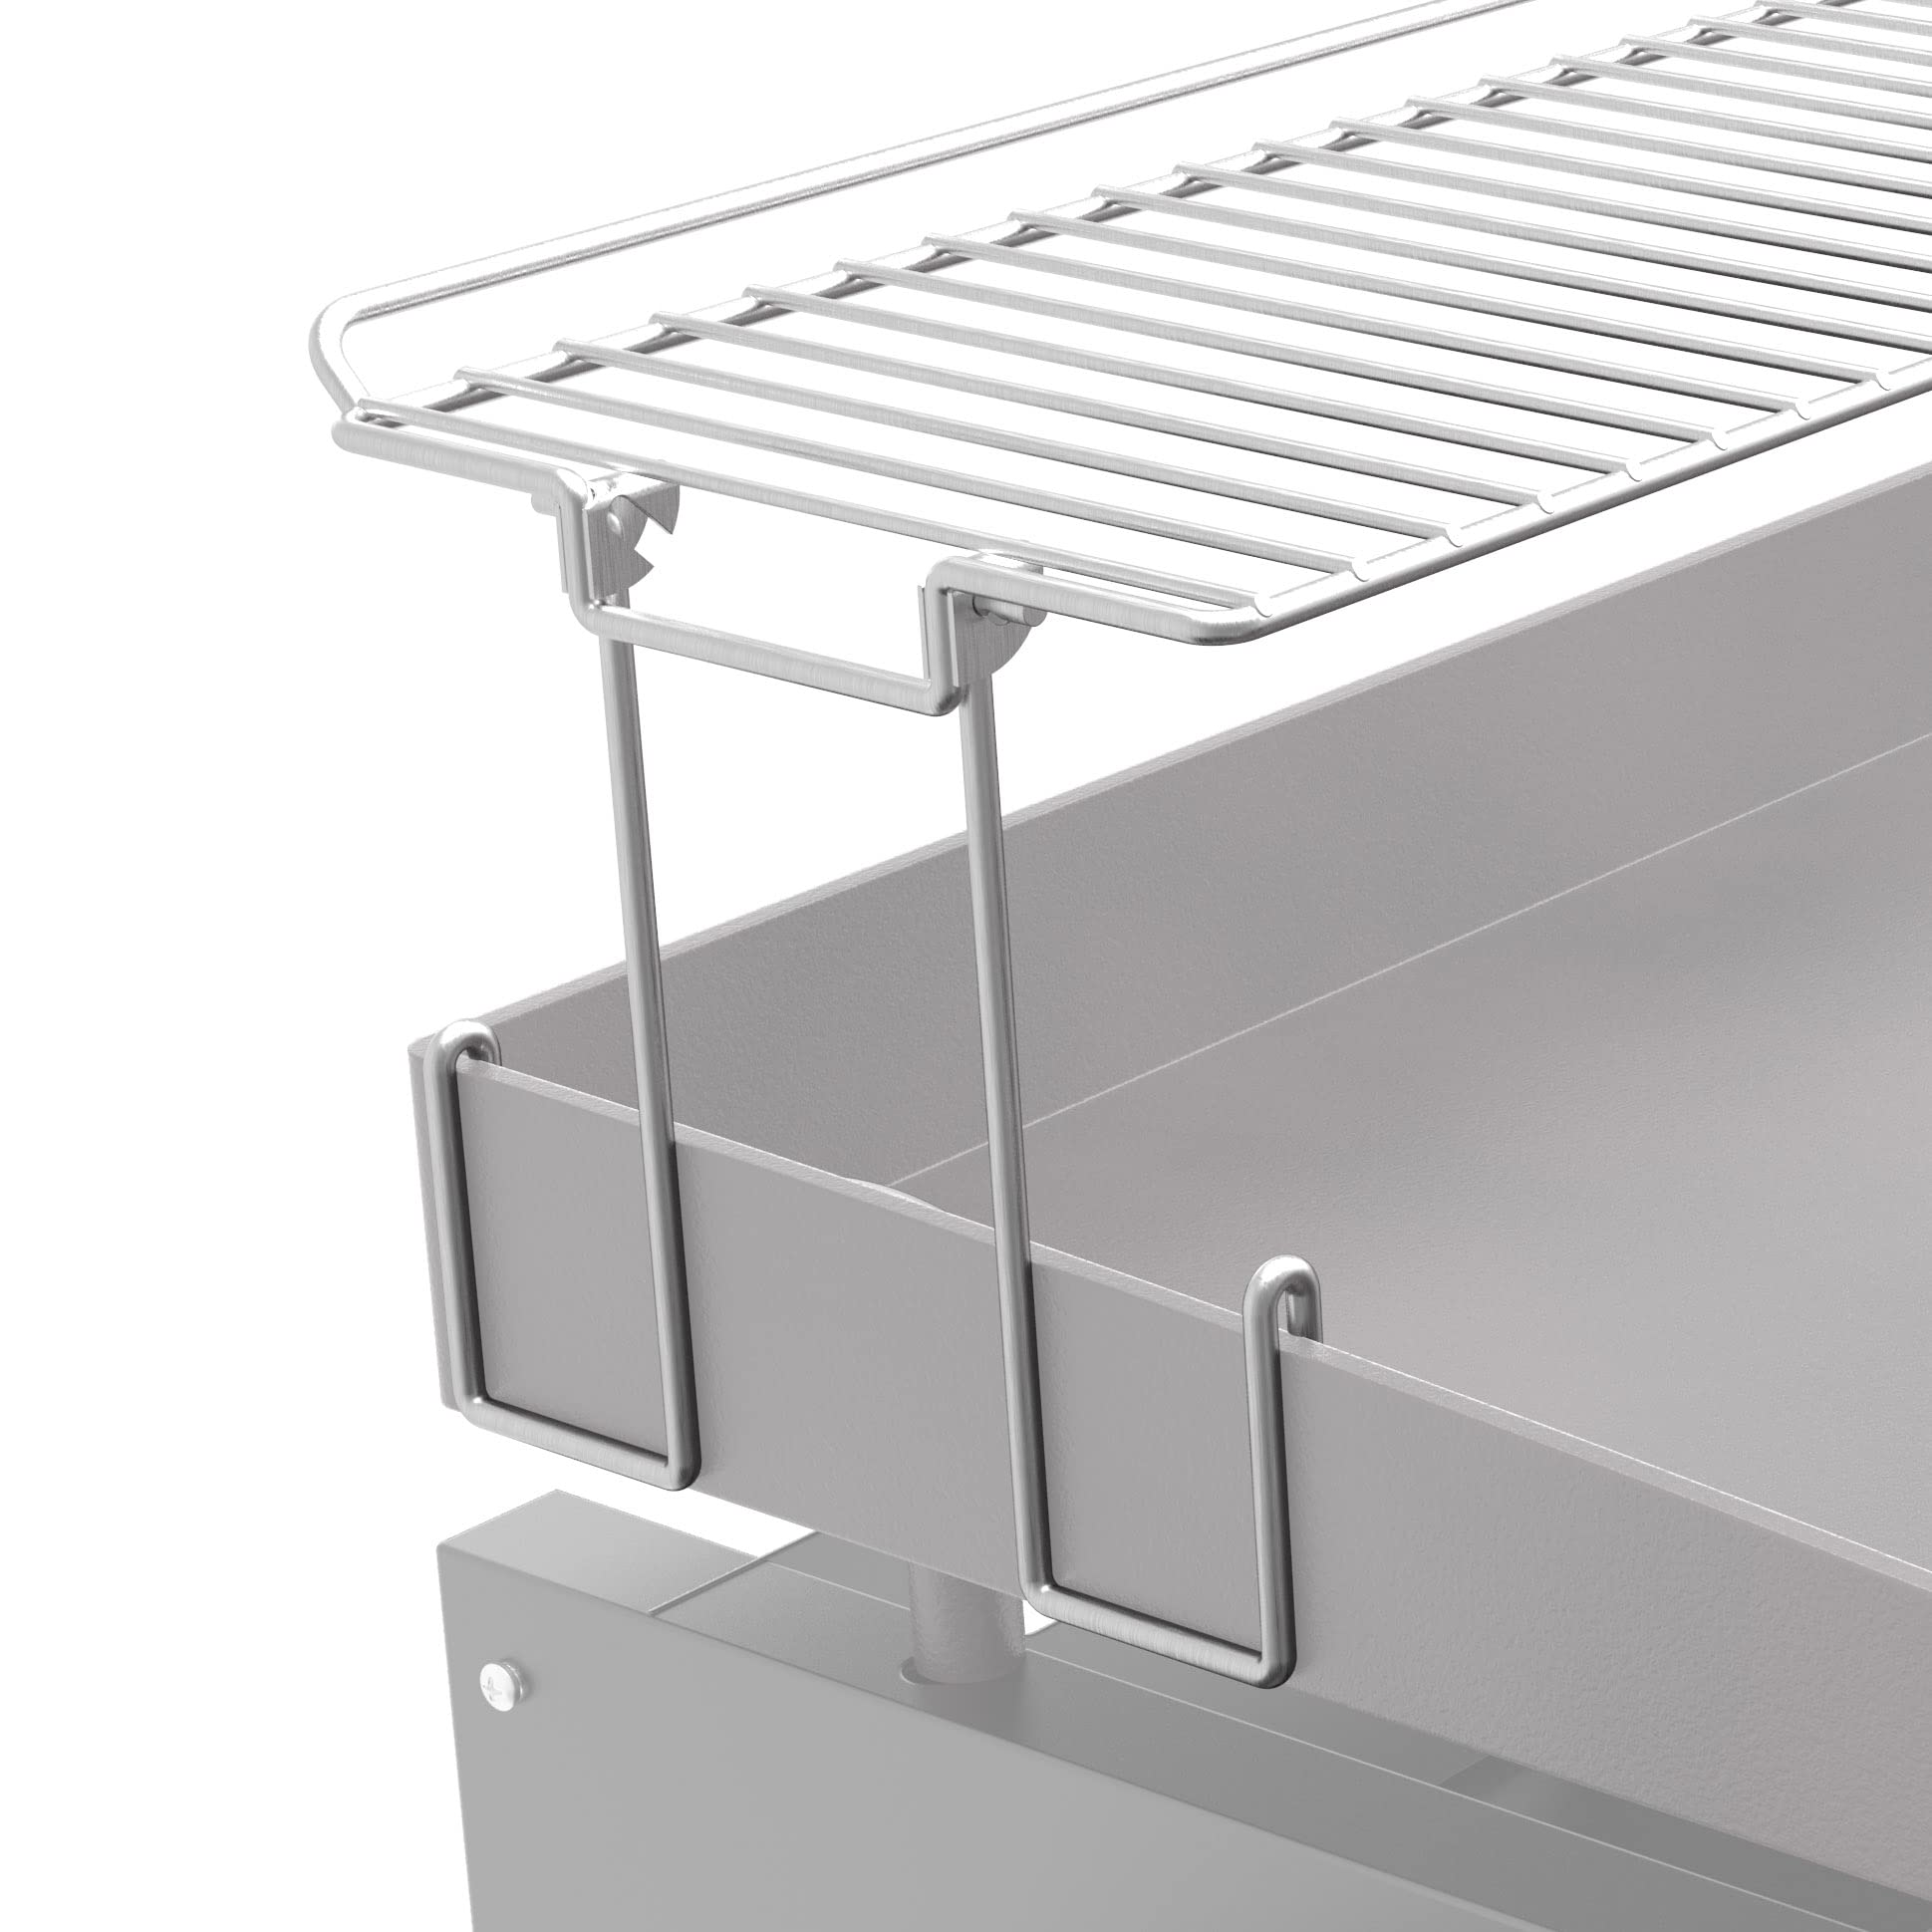 Yukon Glory Griddle Warming Rack, Designed for Camp Chef FTG600 Griddles, One-Step Clip-On Attachment, Stainless Steel Flat Top Griddle Accessory